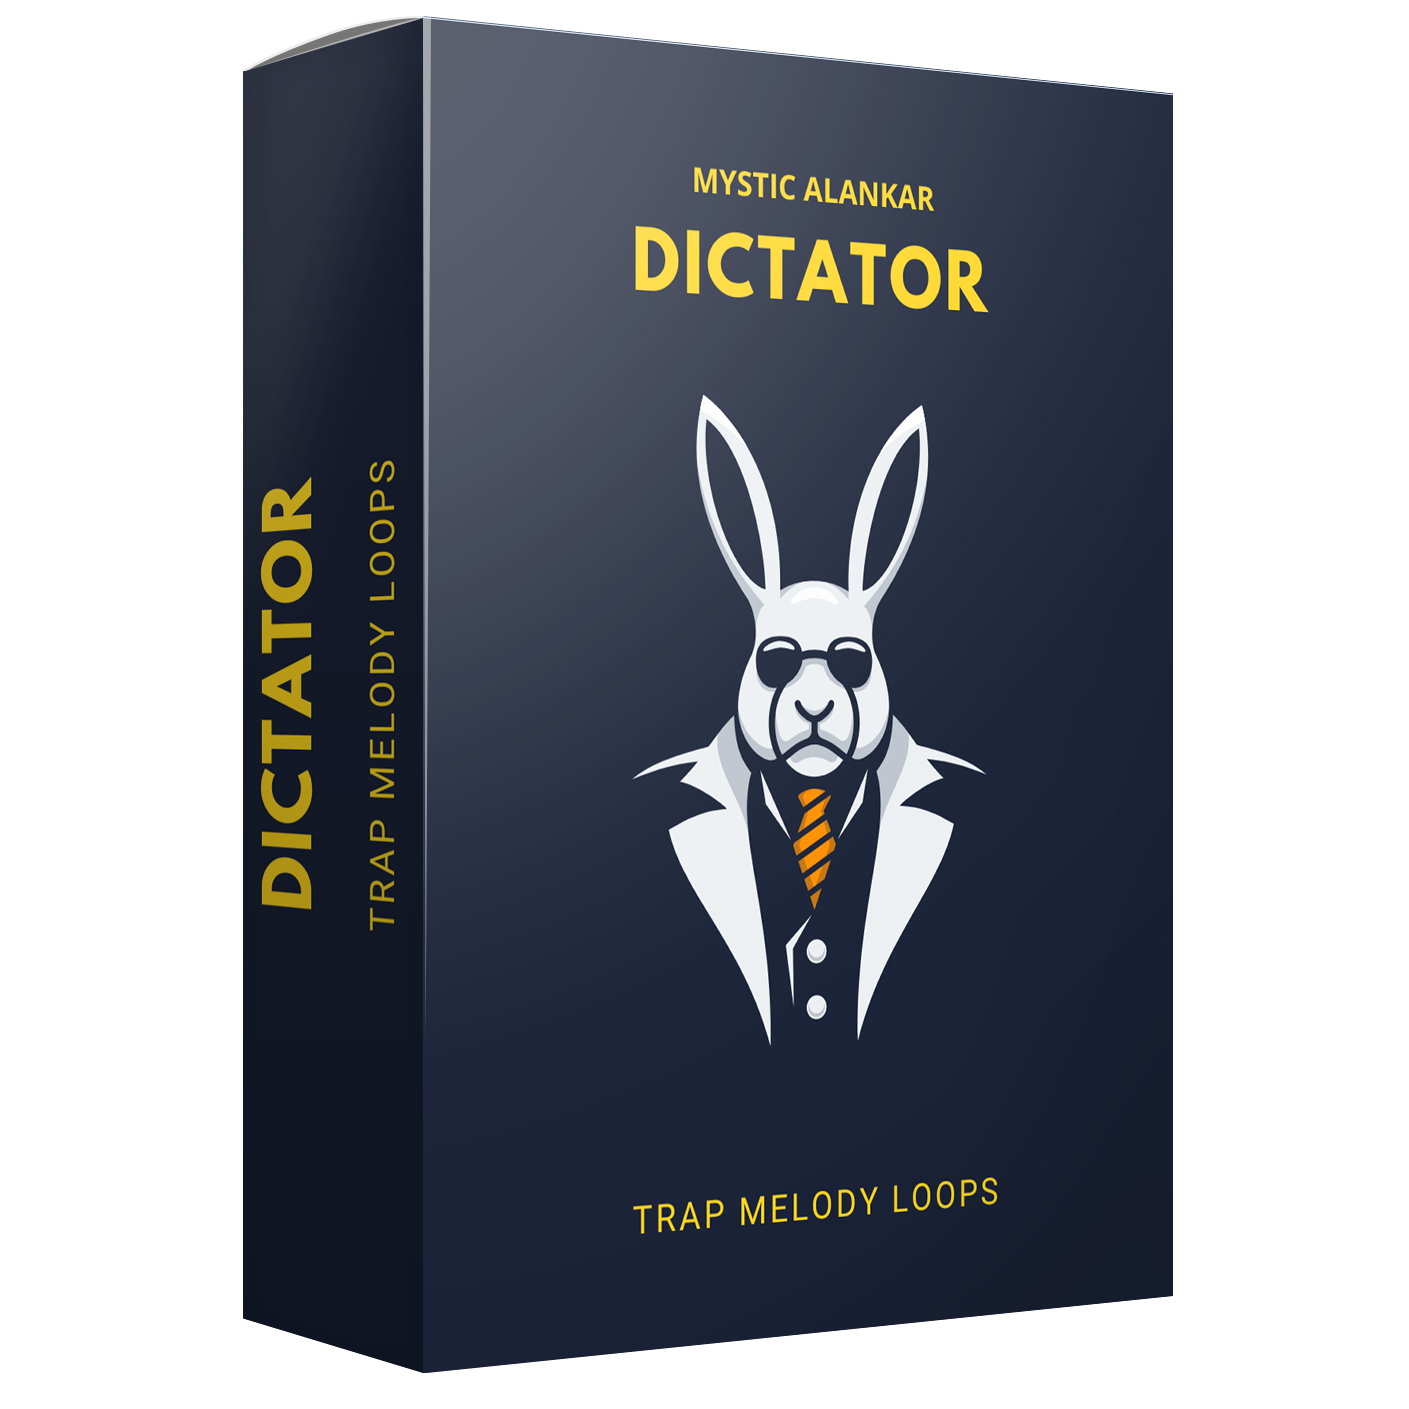 Dictator - Trap Melody Loops